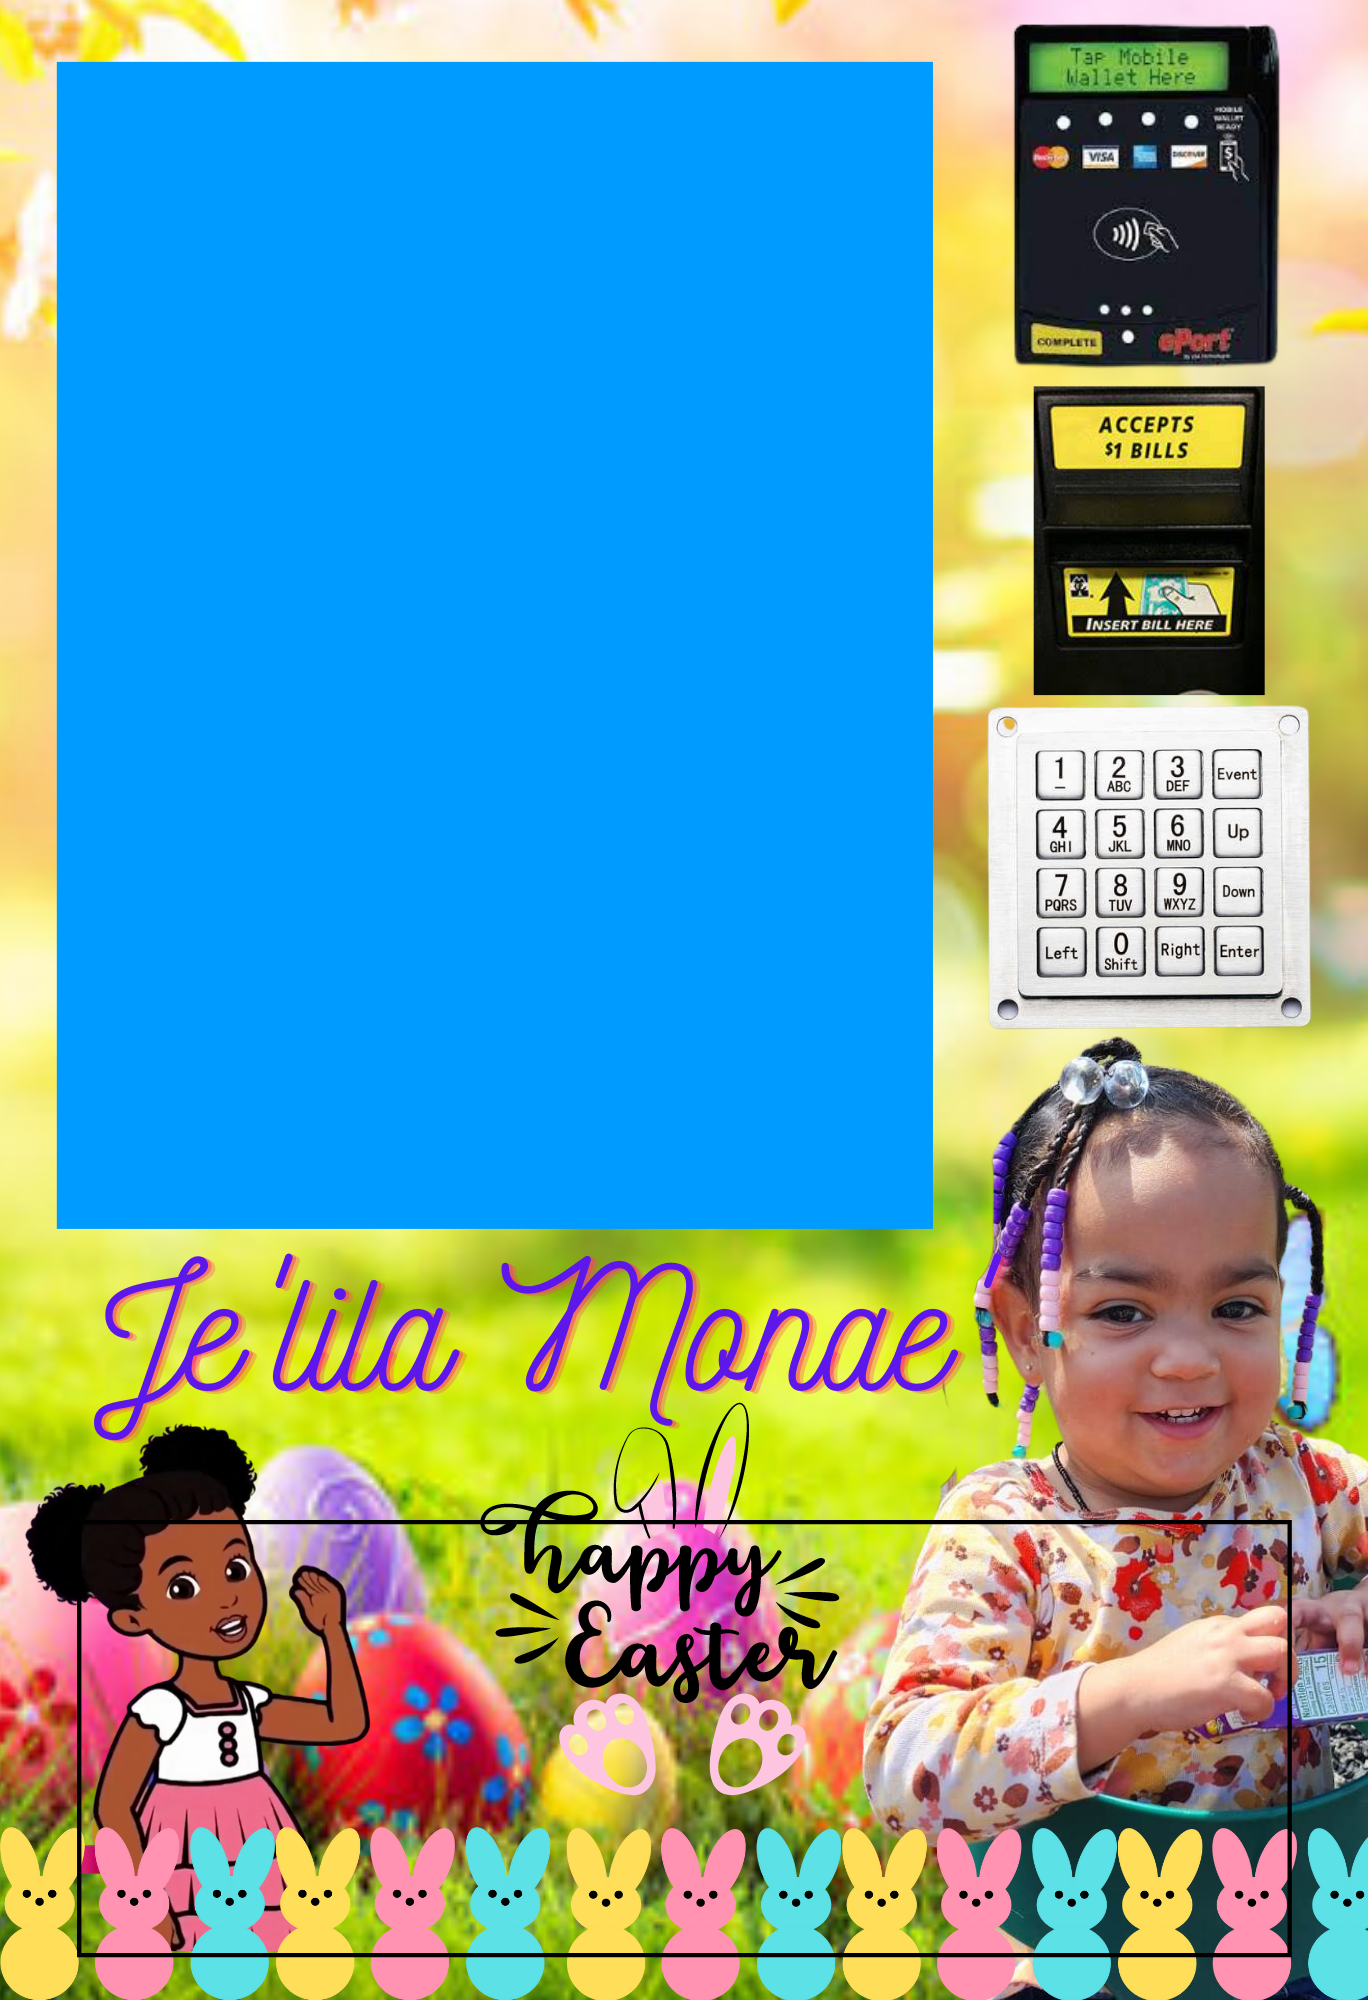 Children's Faux Vending/Candy Machine Template (Digital File Only) - Kilante Ink